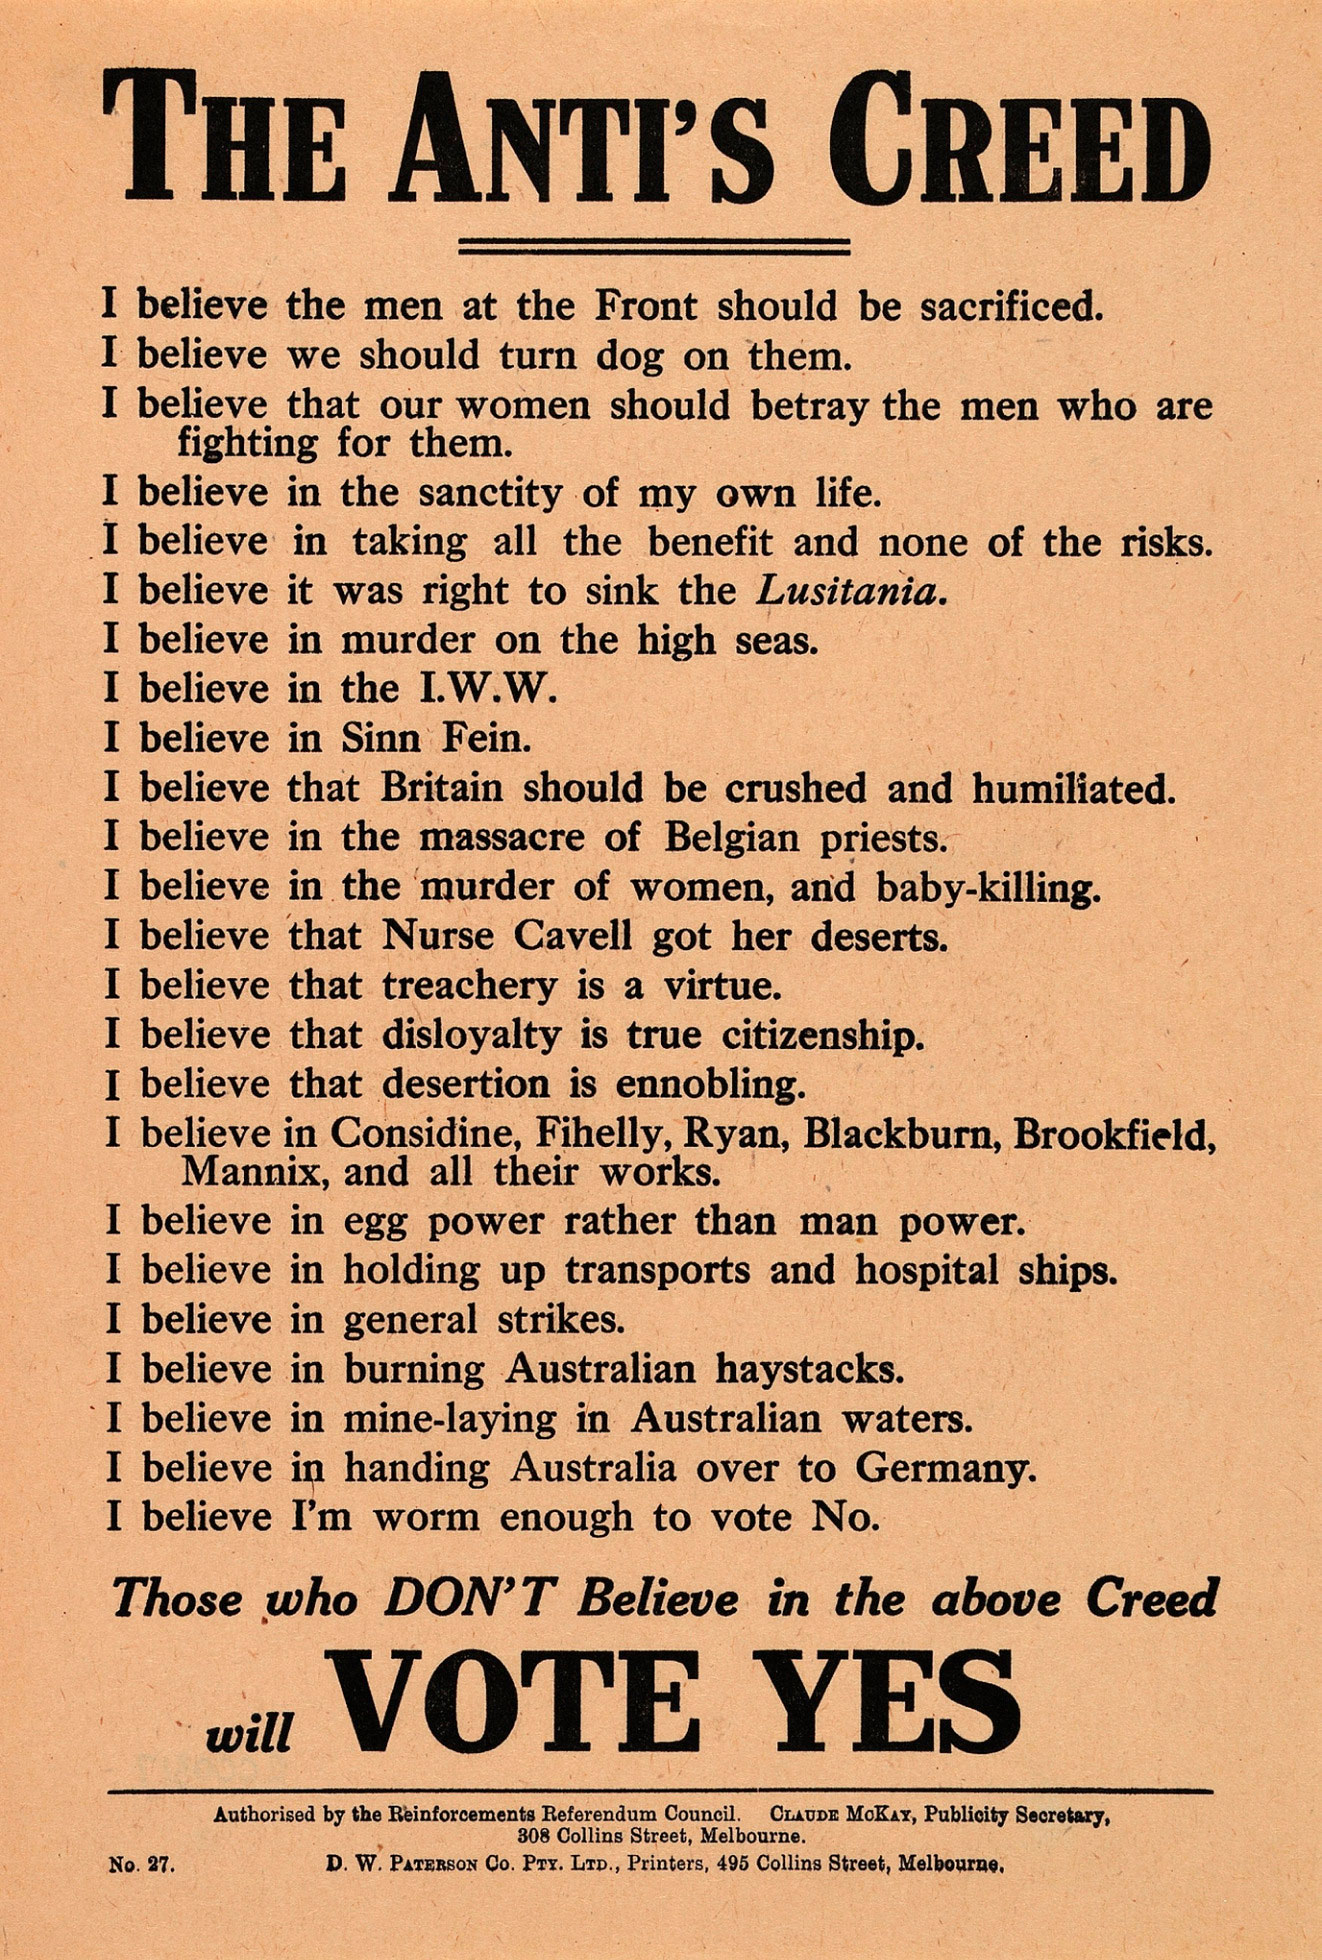 ‘The anti’s creed’ leaflet, 1917.